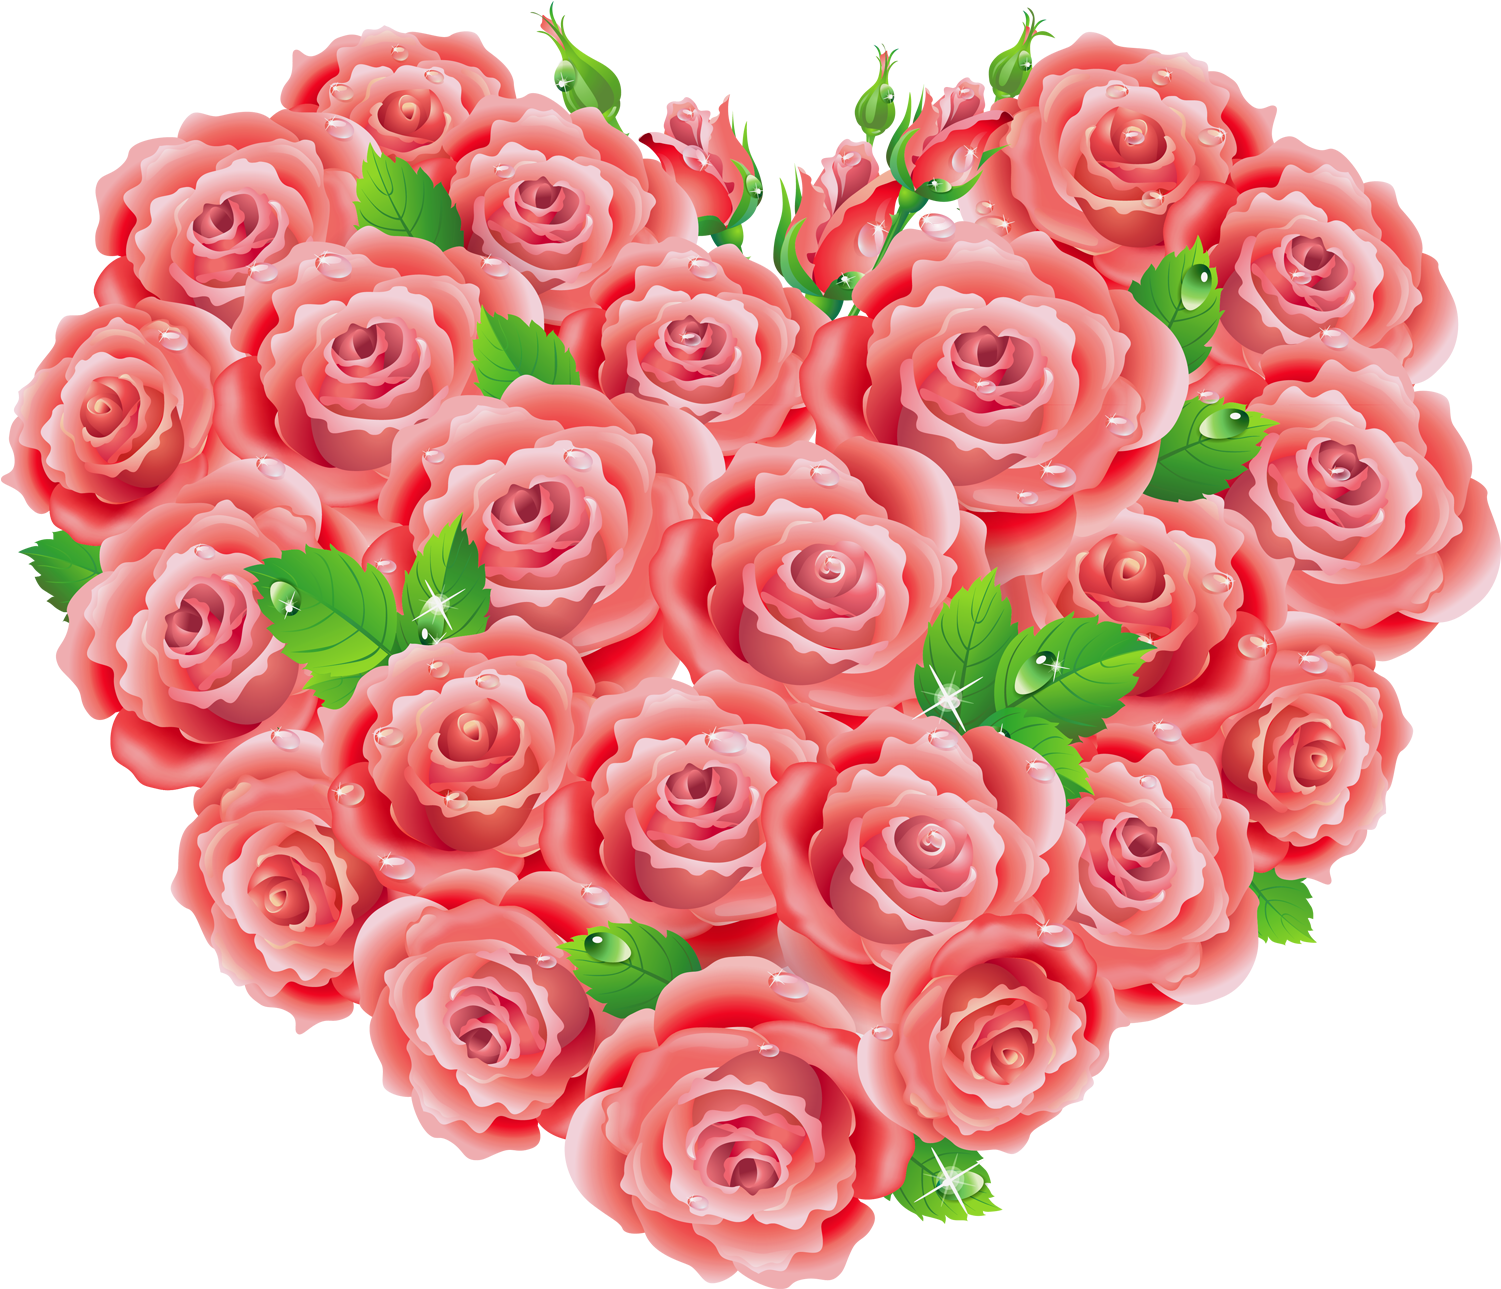 Red Roses Heart Clipart - Pink Roses And Hearts (1524x1315)